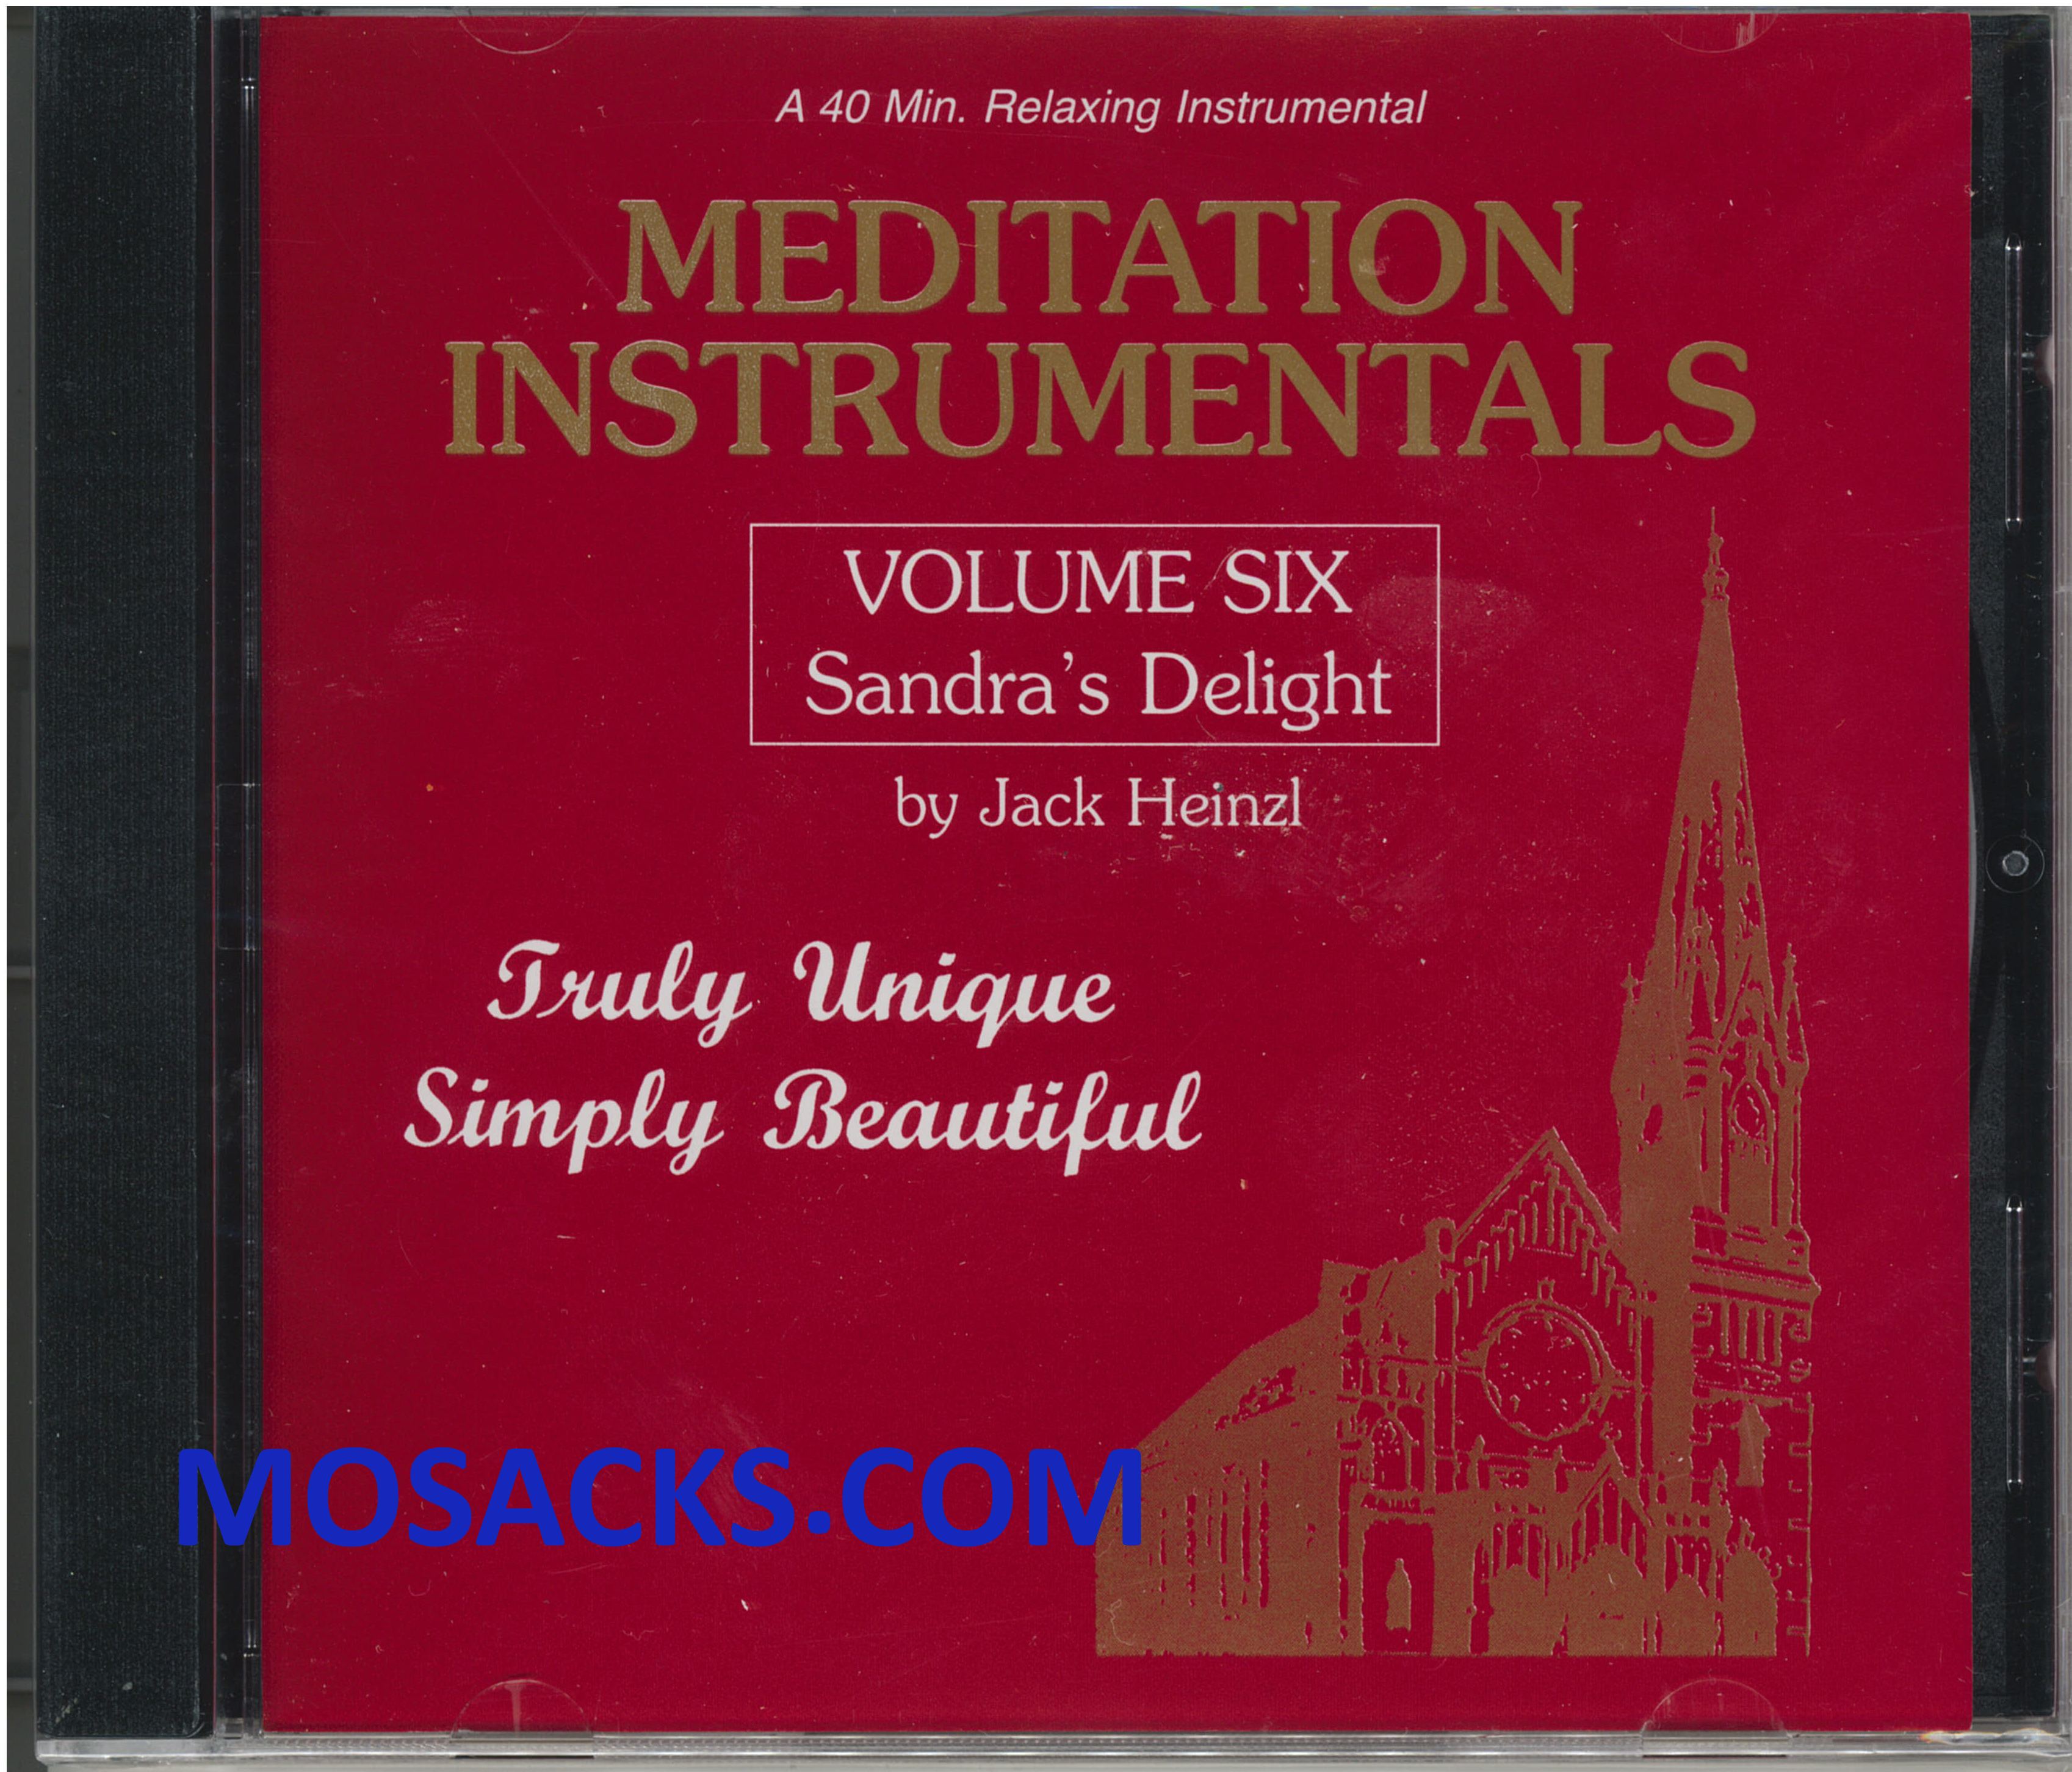 Meditation Instrumentals Volume 6 by Jack Heinzl concentrates on many of The Fruits of the Holy Spirit, found in Galatians 5:22-23: Love, Joy, Peace, Patience, Kindness, Generosity, Faithfulness, Gentleness, and Self-control 285-675430520016